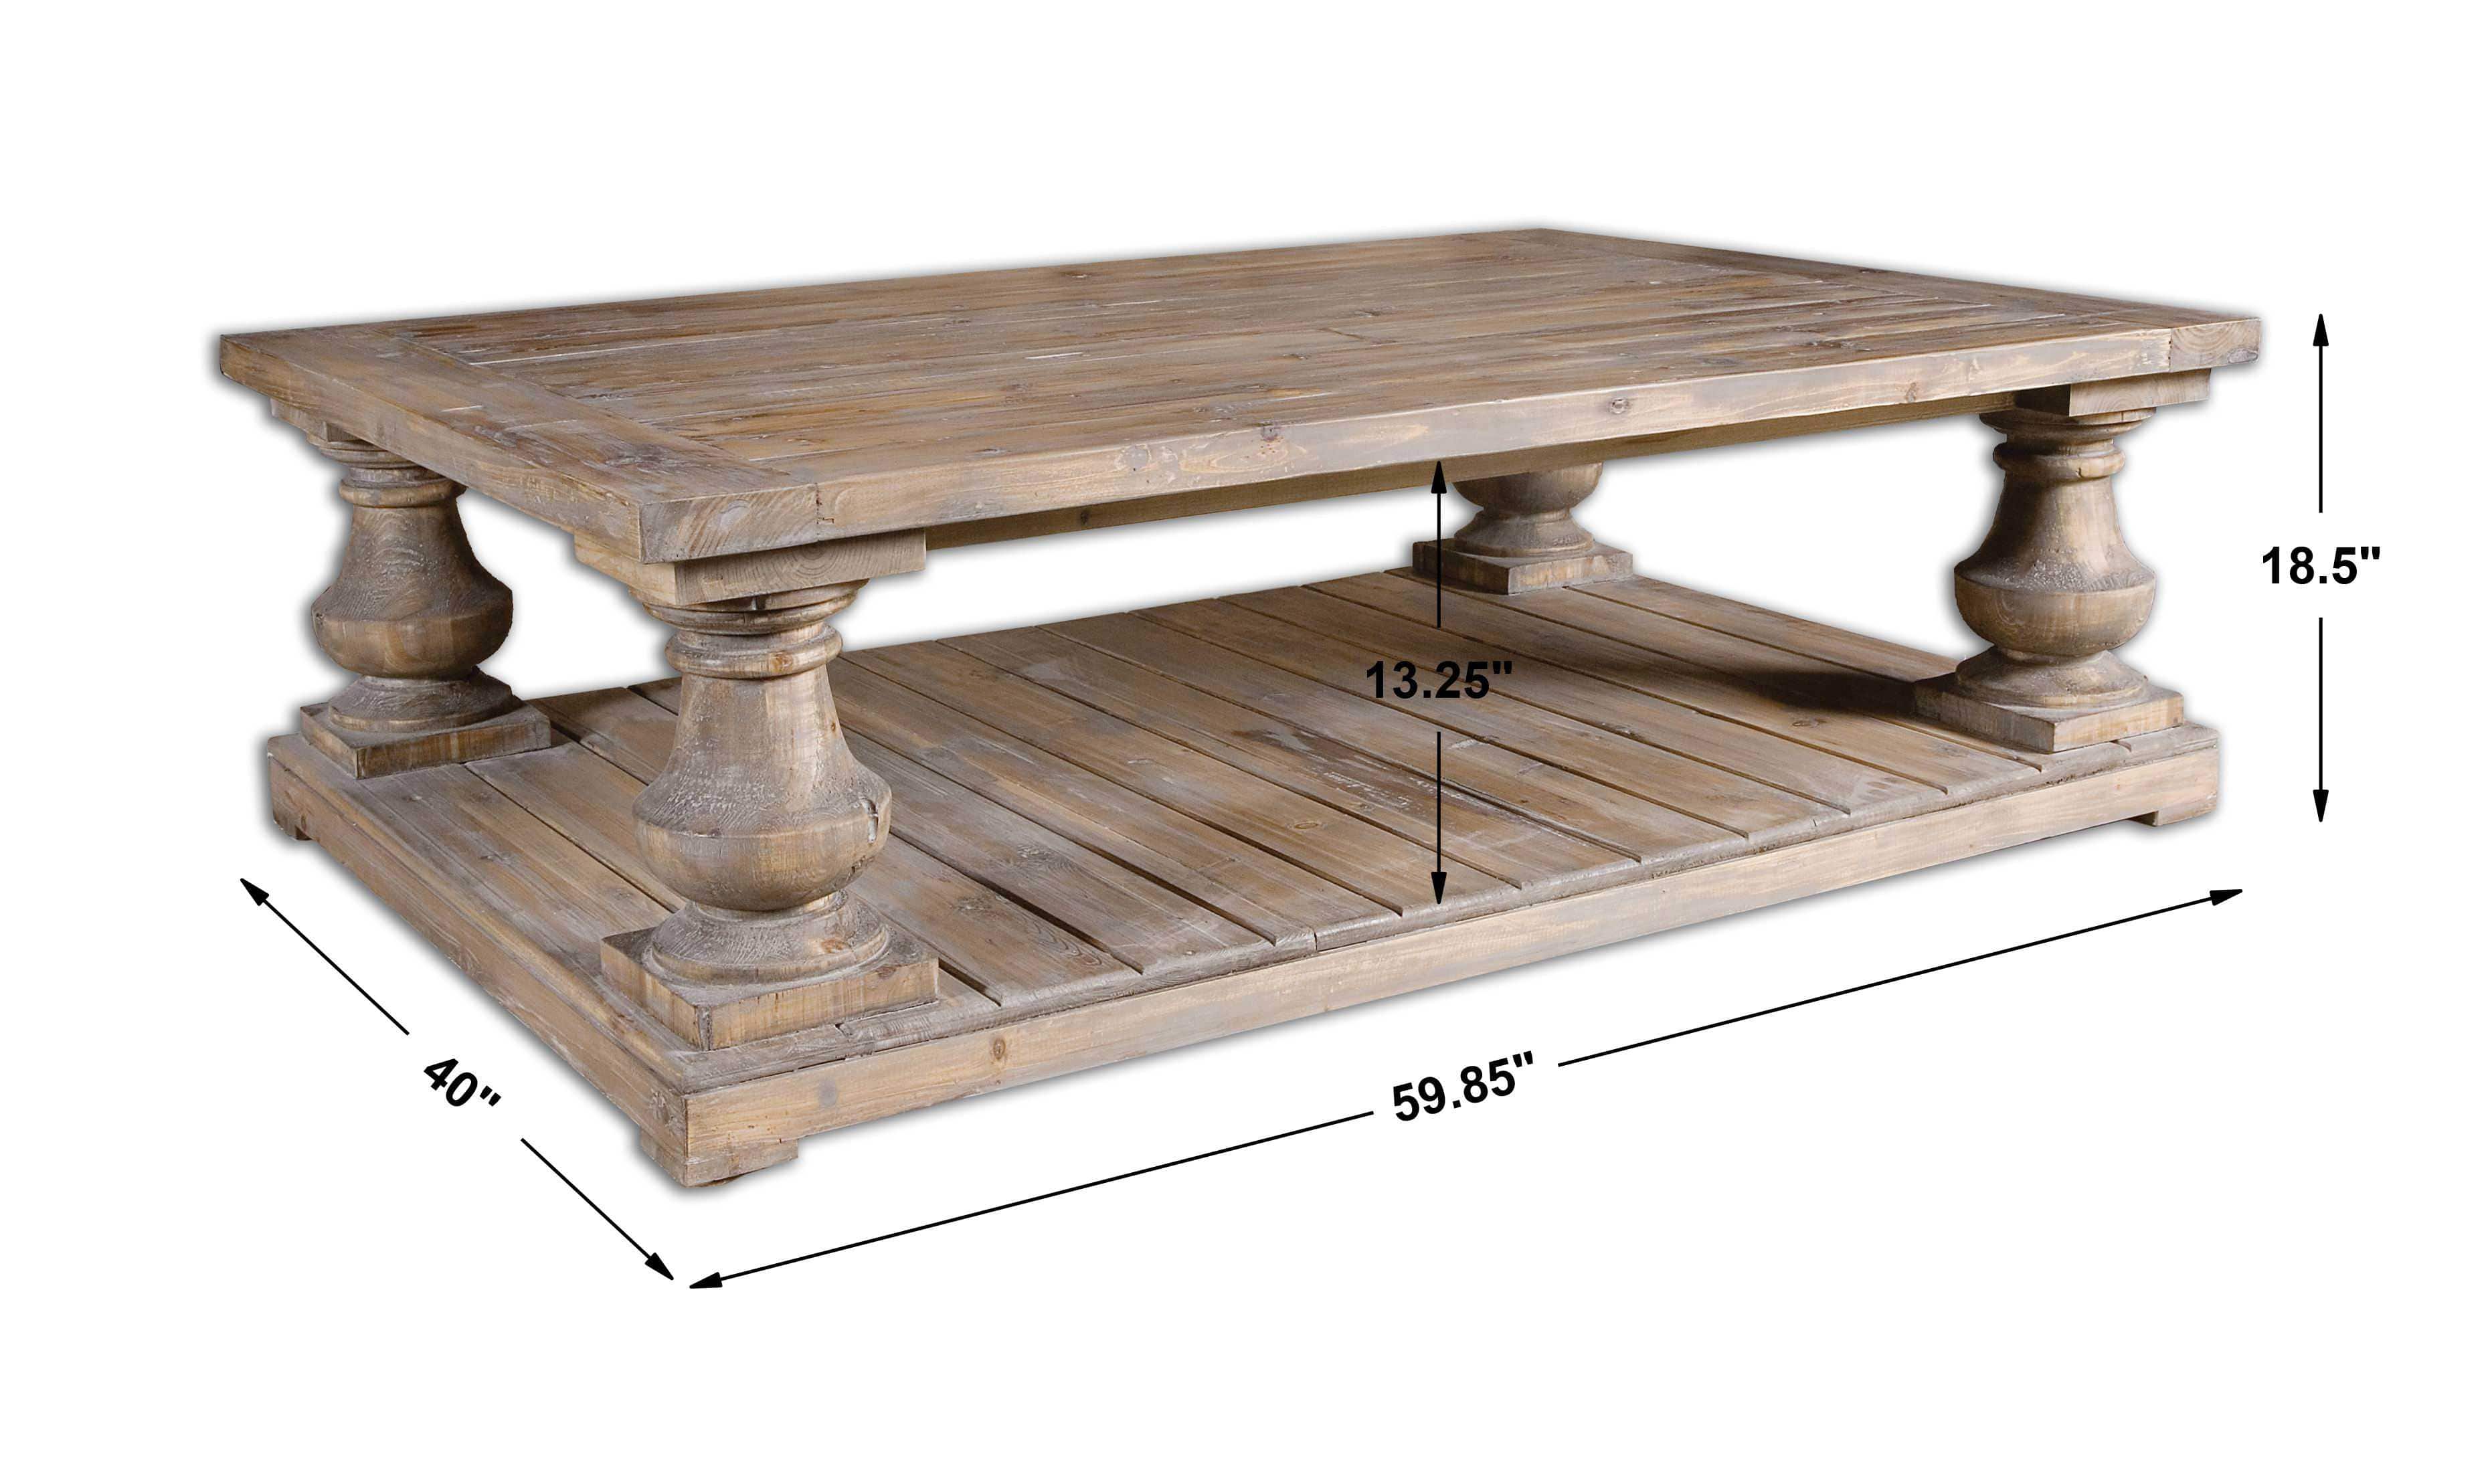 Stratford Rustic Coffee Table Uttermost